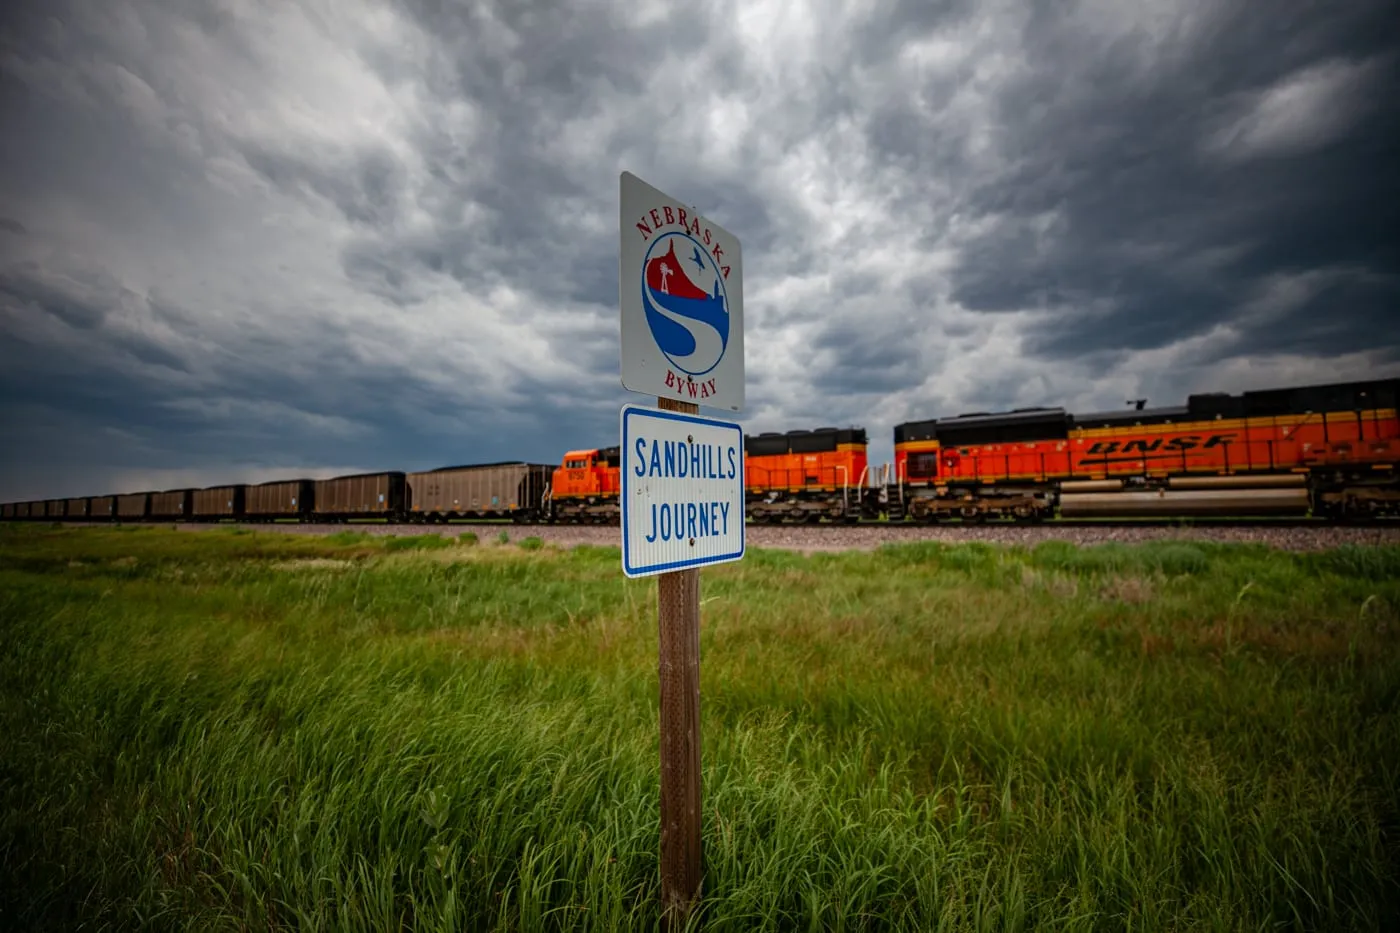 Nebraska Sandhills Journey Scenic Byway Road Sign with a train in the background